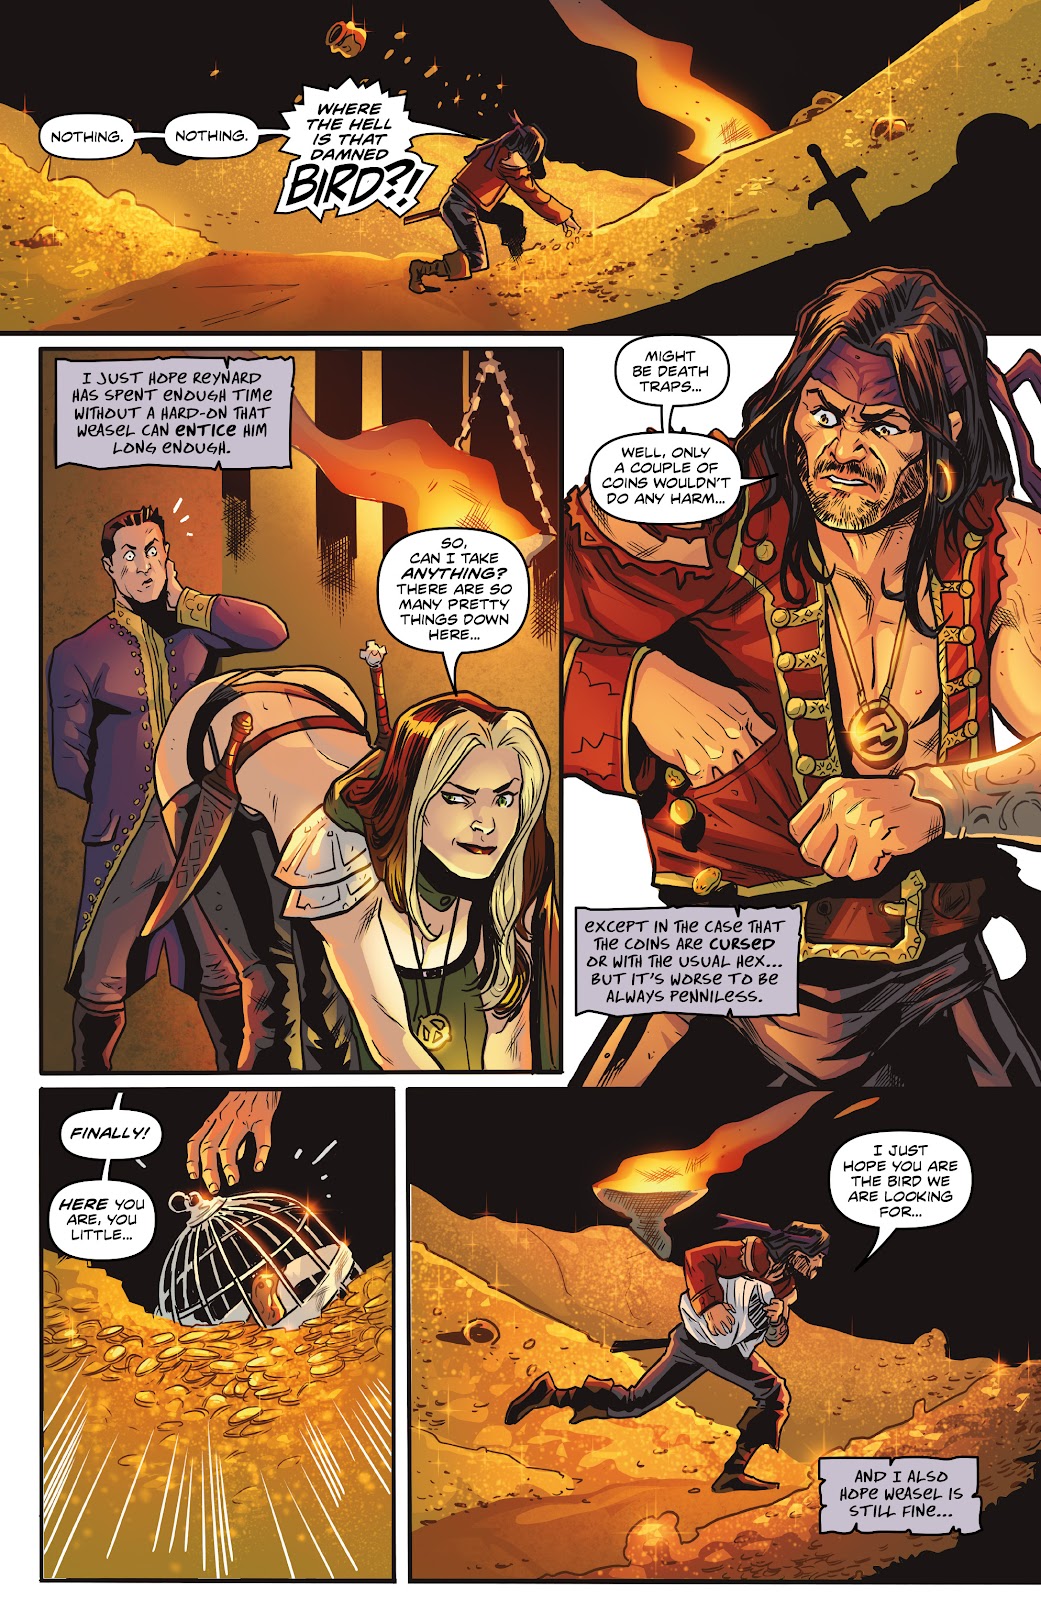 Rogues!: The Burning Heart issue 5 - Page 16